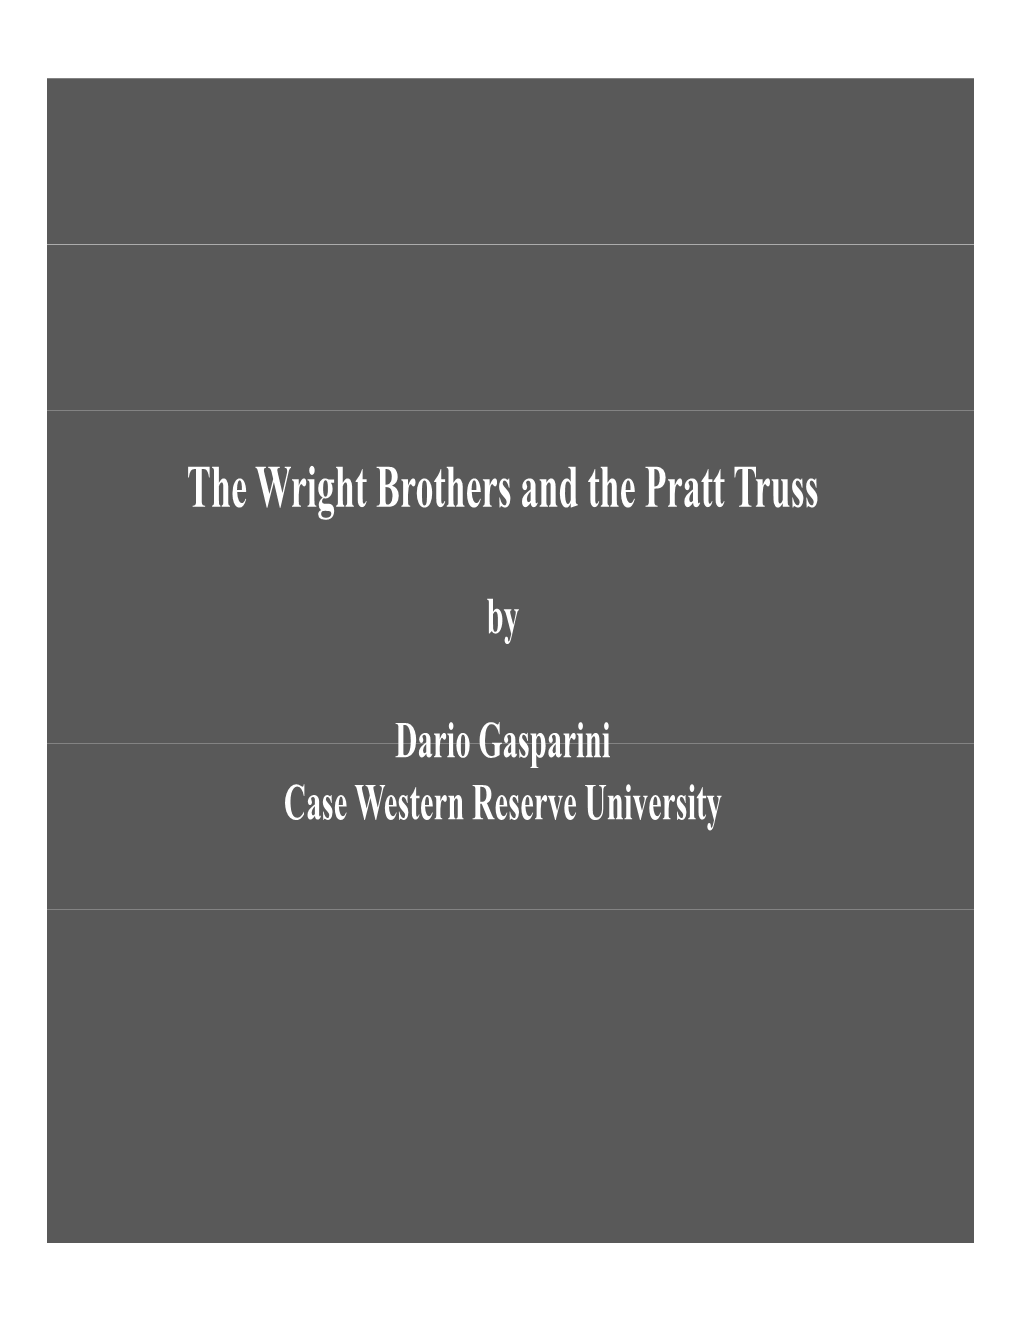 The Wright Brothers and the Pratt Truss